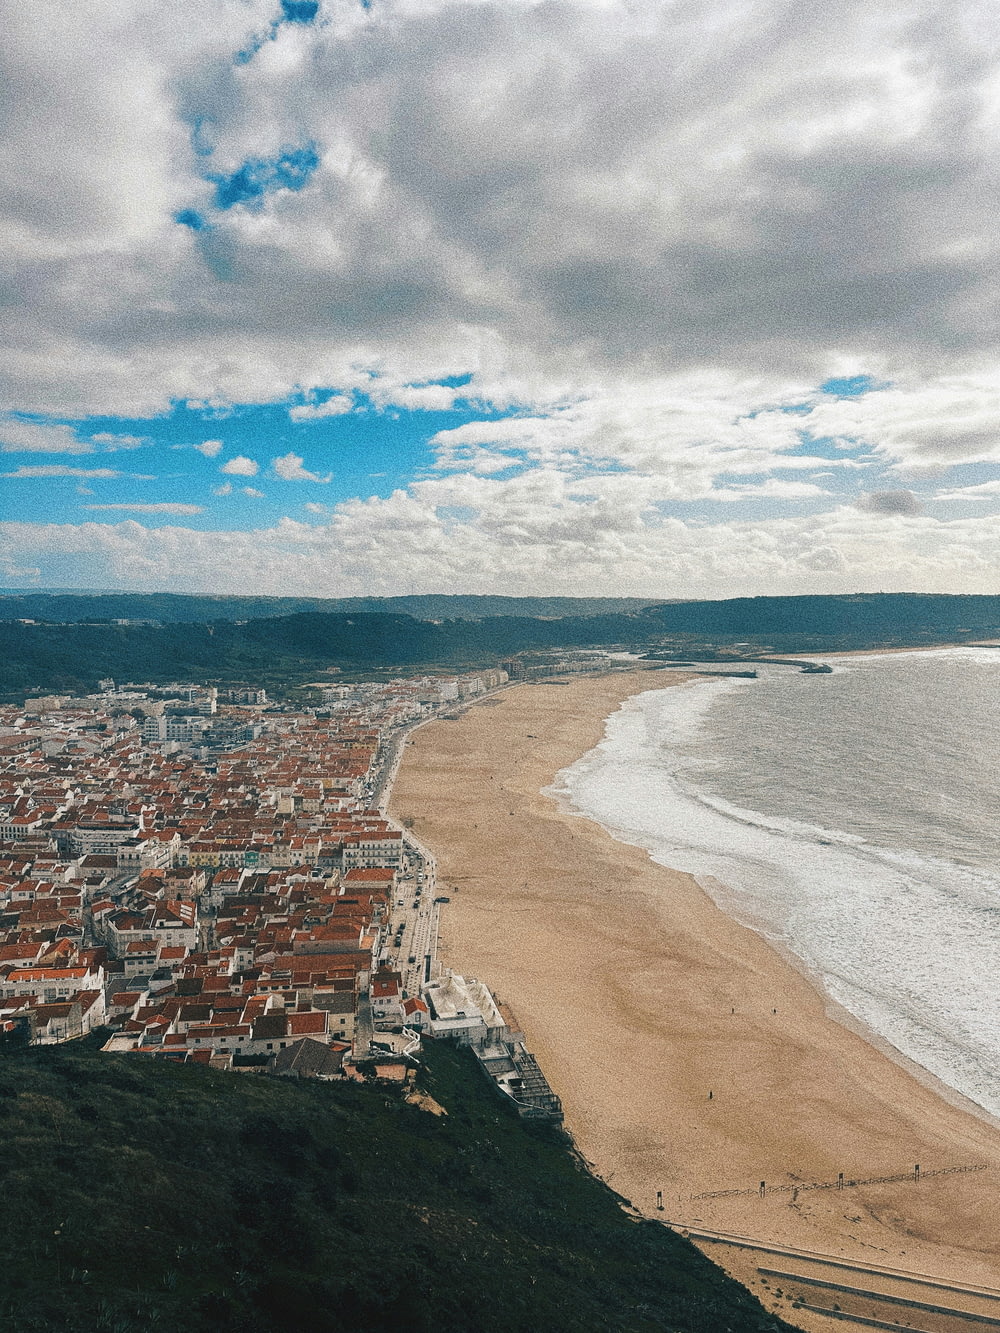 a bird's eye view of a beach and a city